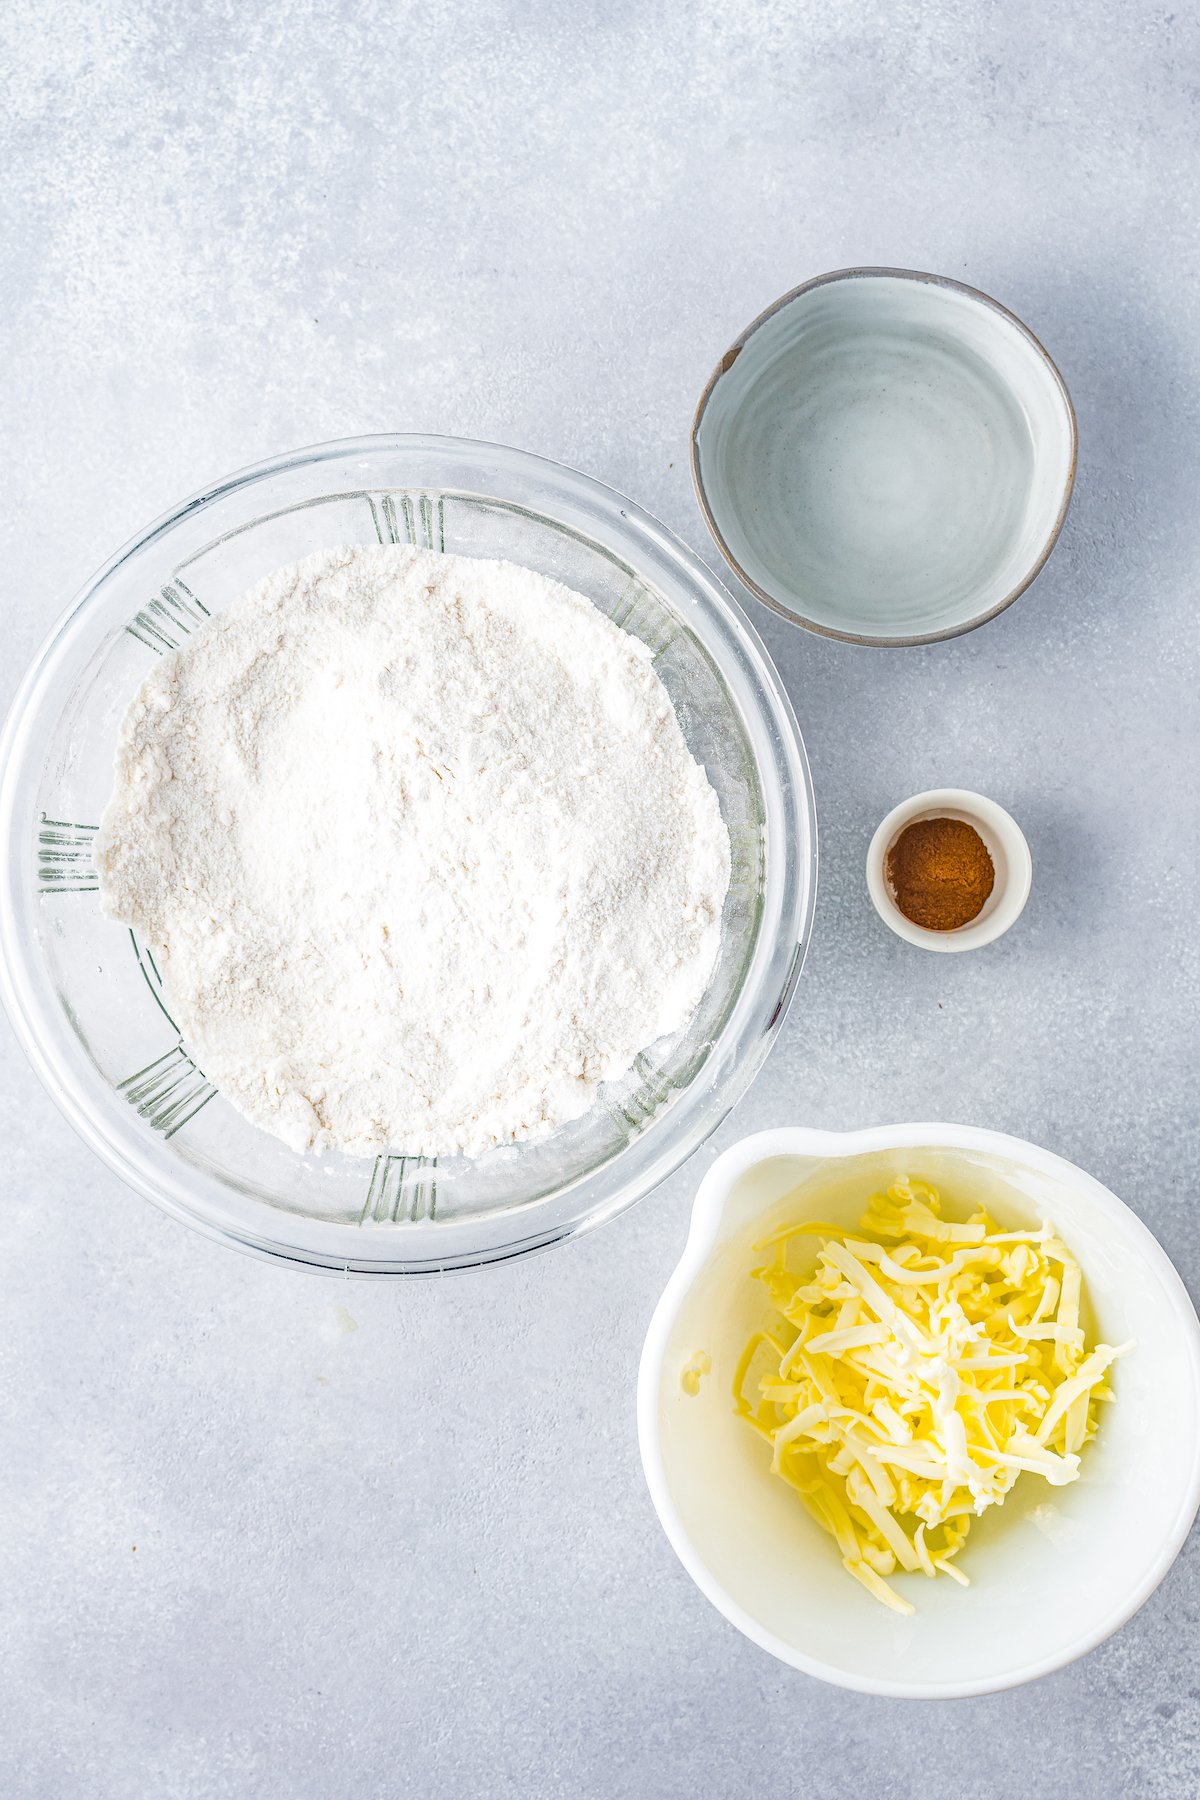 ingredients to make pastry dough including flour, shredded butter, water, and cinnamon